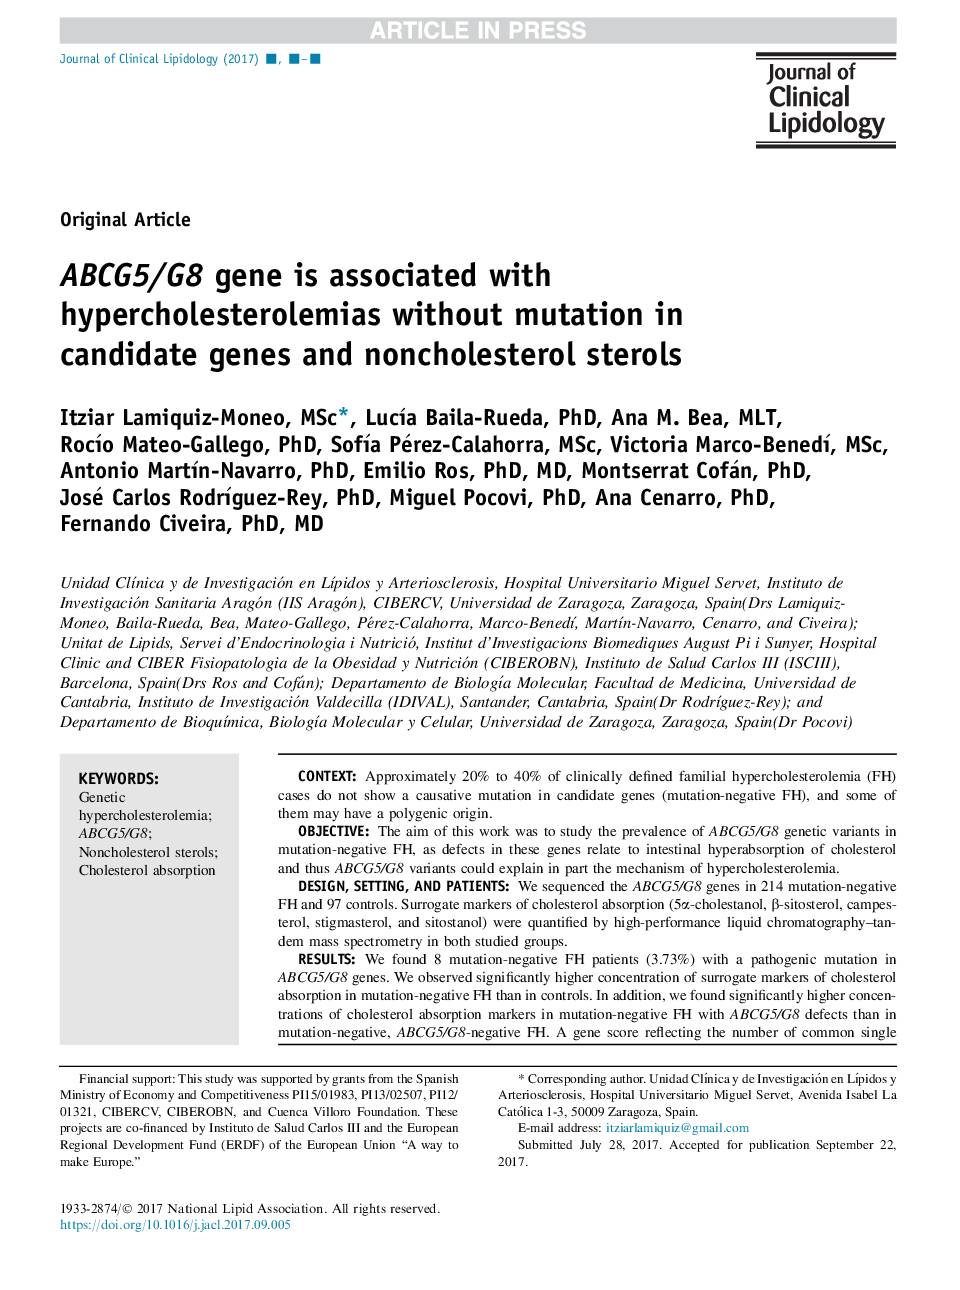 ABCG5/G8 gene is associated with hypercholesterolemias without mutation in candidate genes and noncholesterol sterols